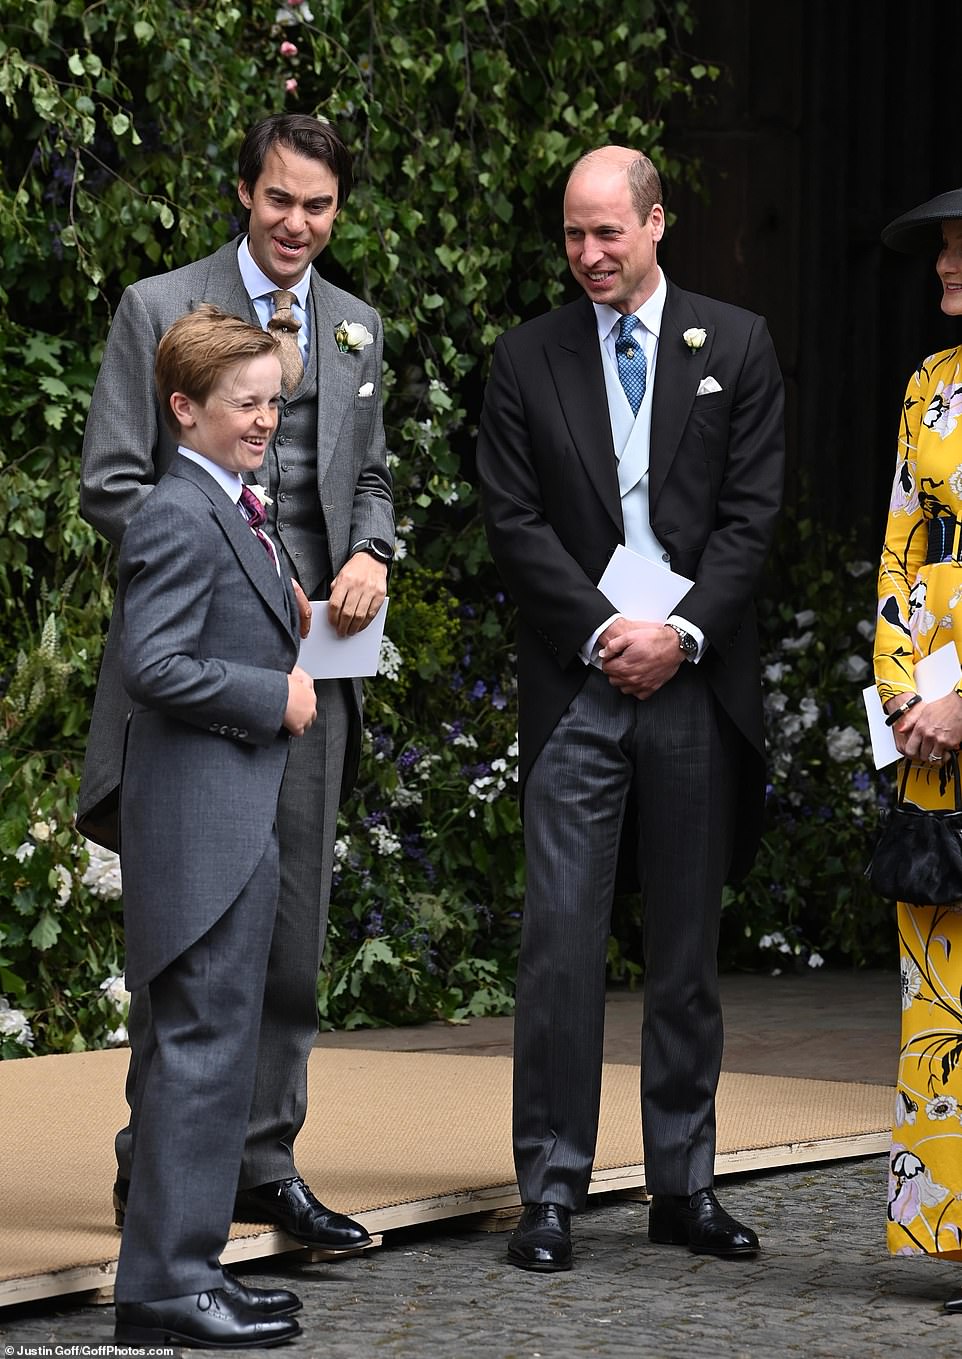 Prince William, who was an usher at the ceremony, and William van Cutsem after the wedding of Olivia and his old friend Hugh